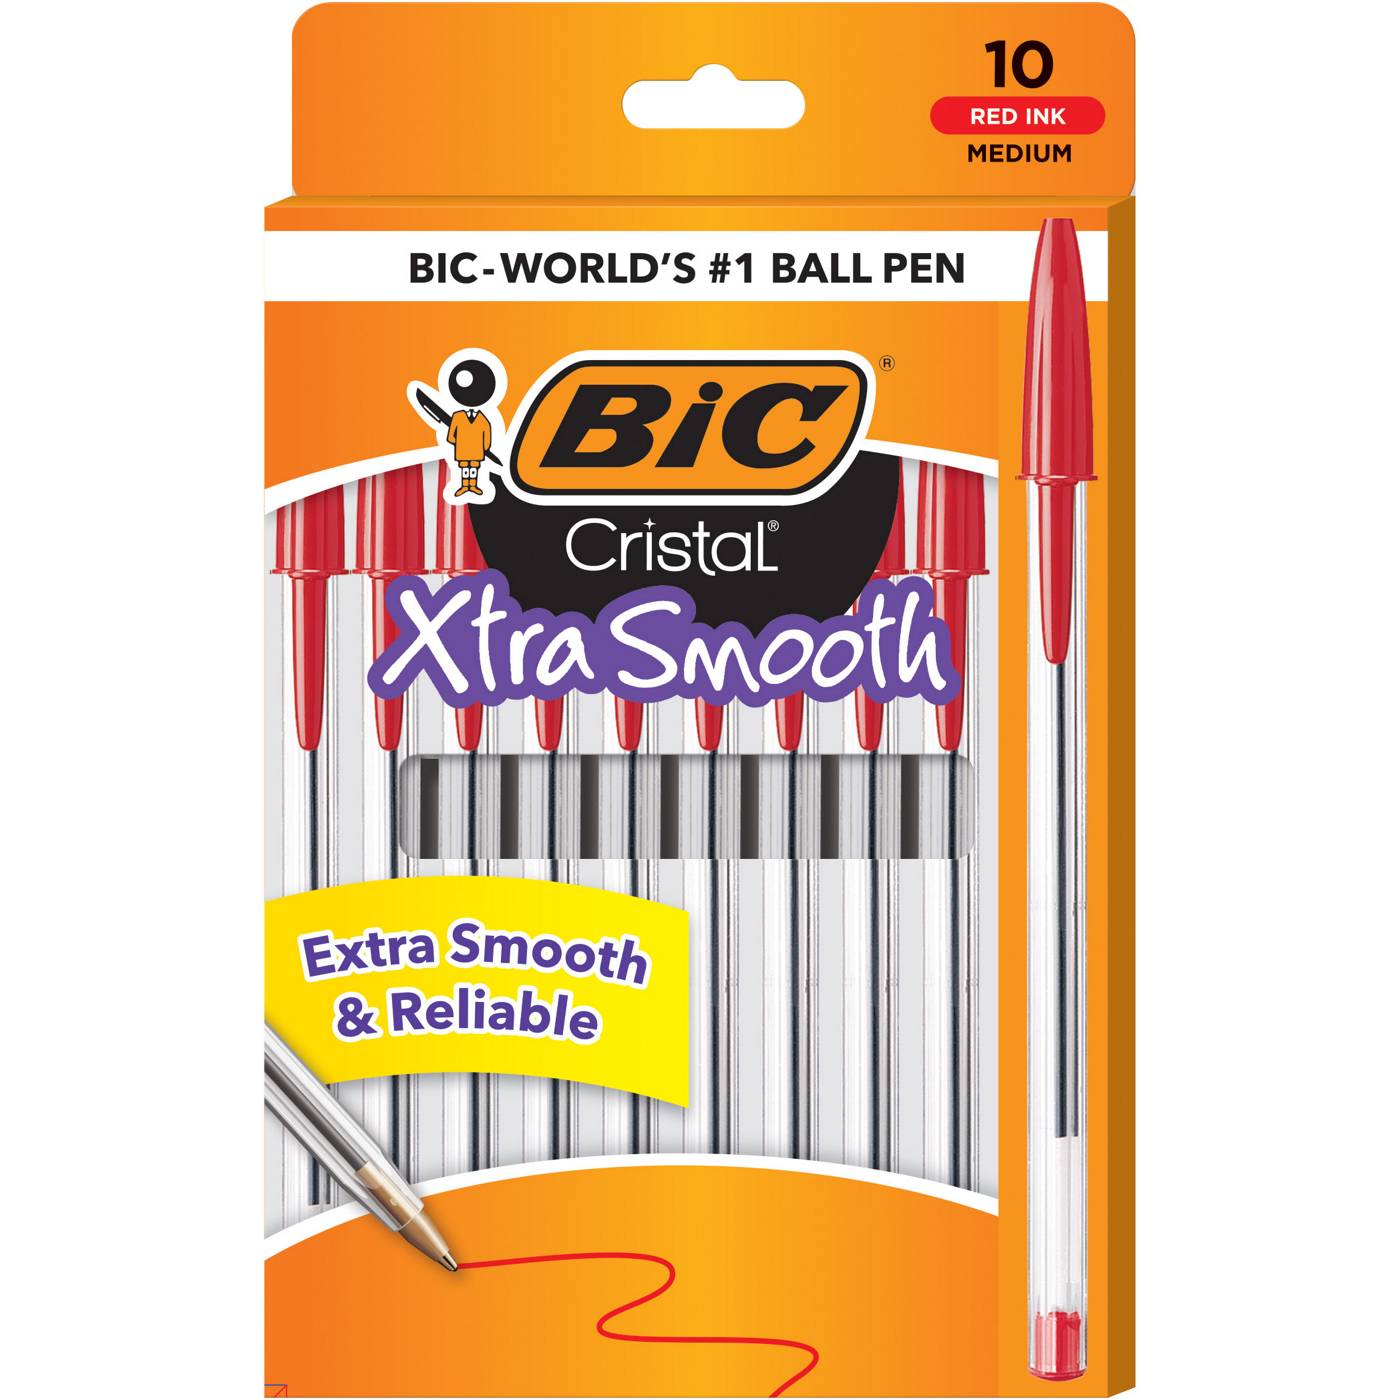 BIC Cristal Xtra Smooth 1.0mm Ball Pens - Red Ink; image 1 of 2